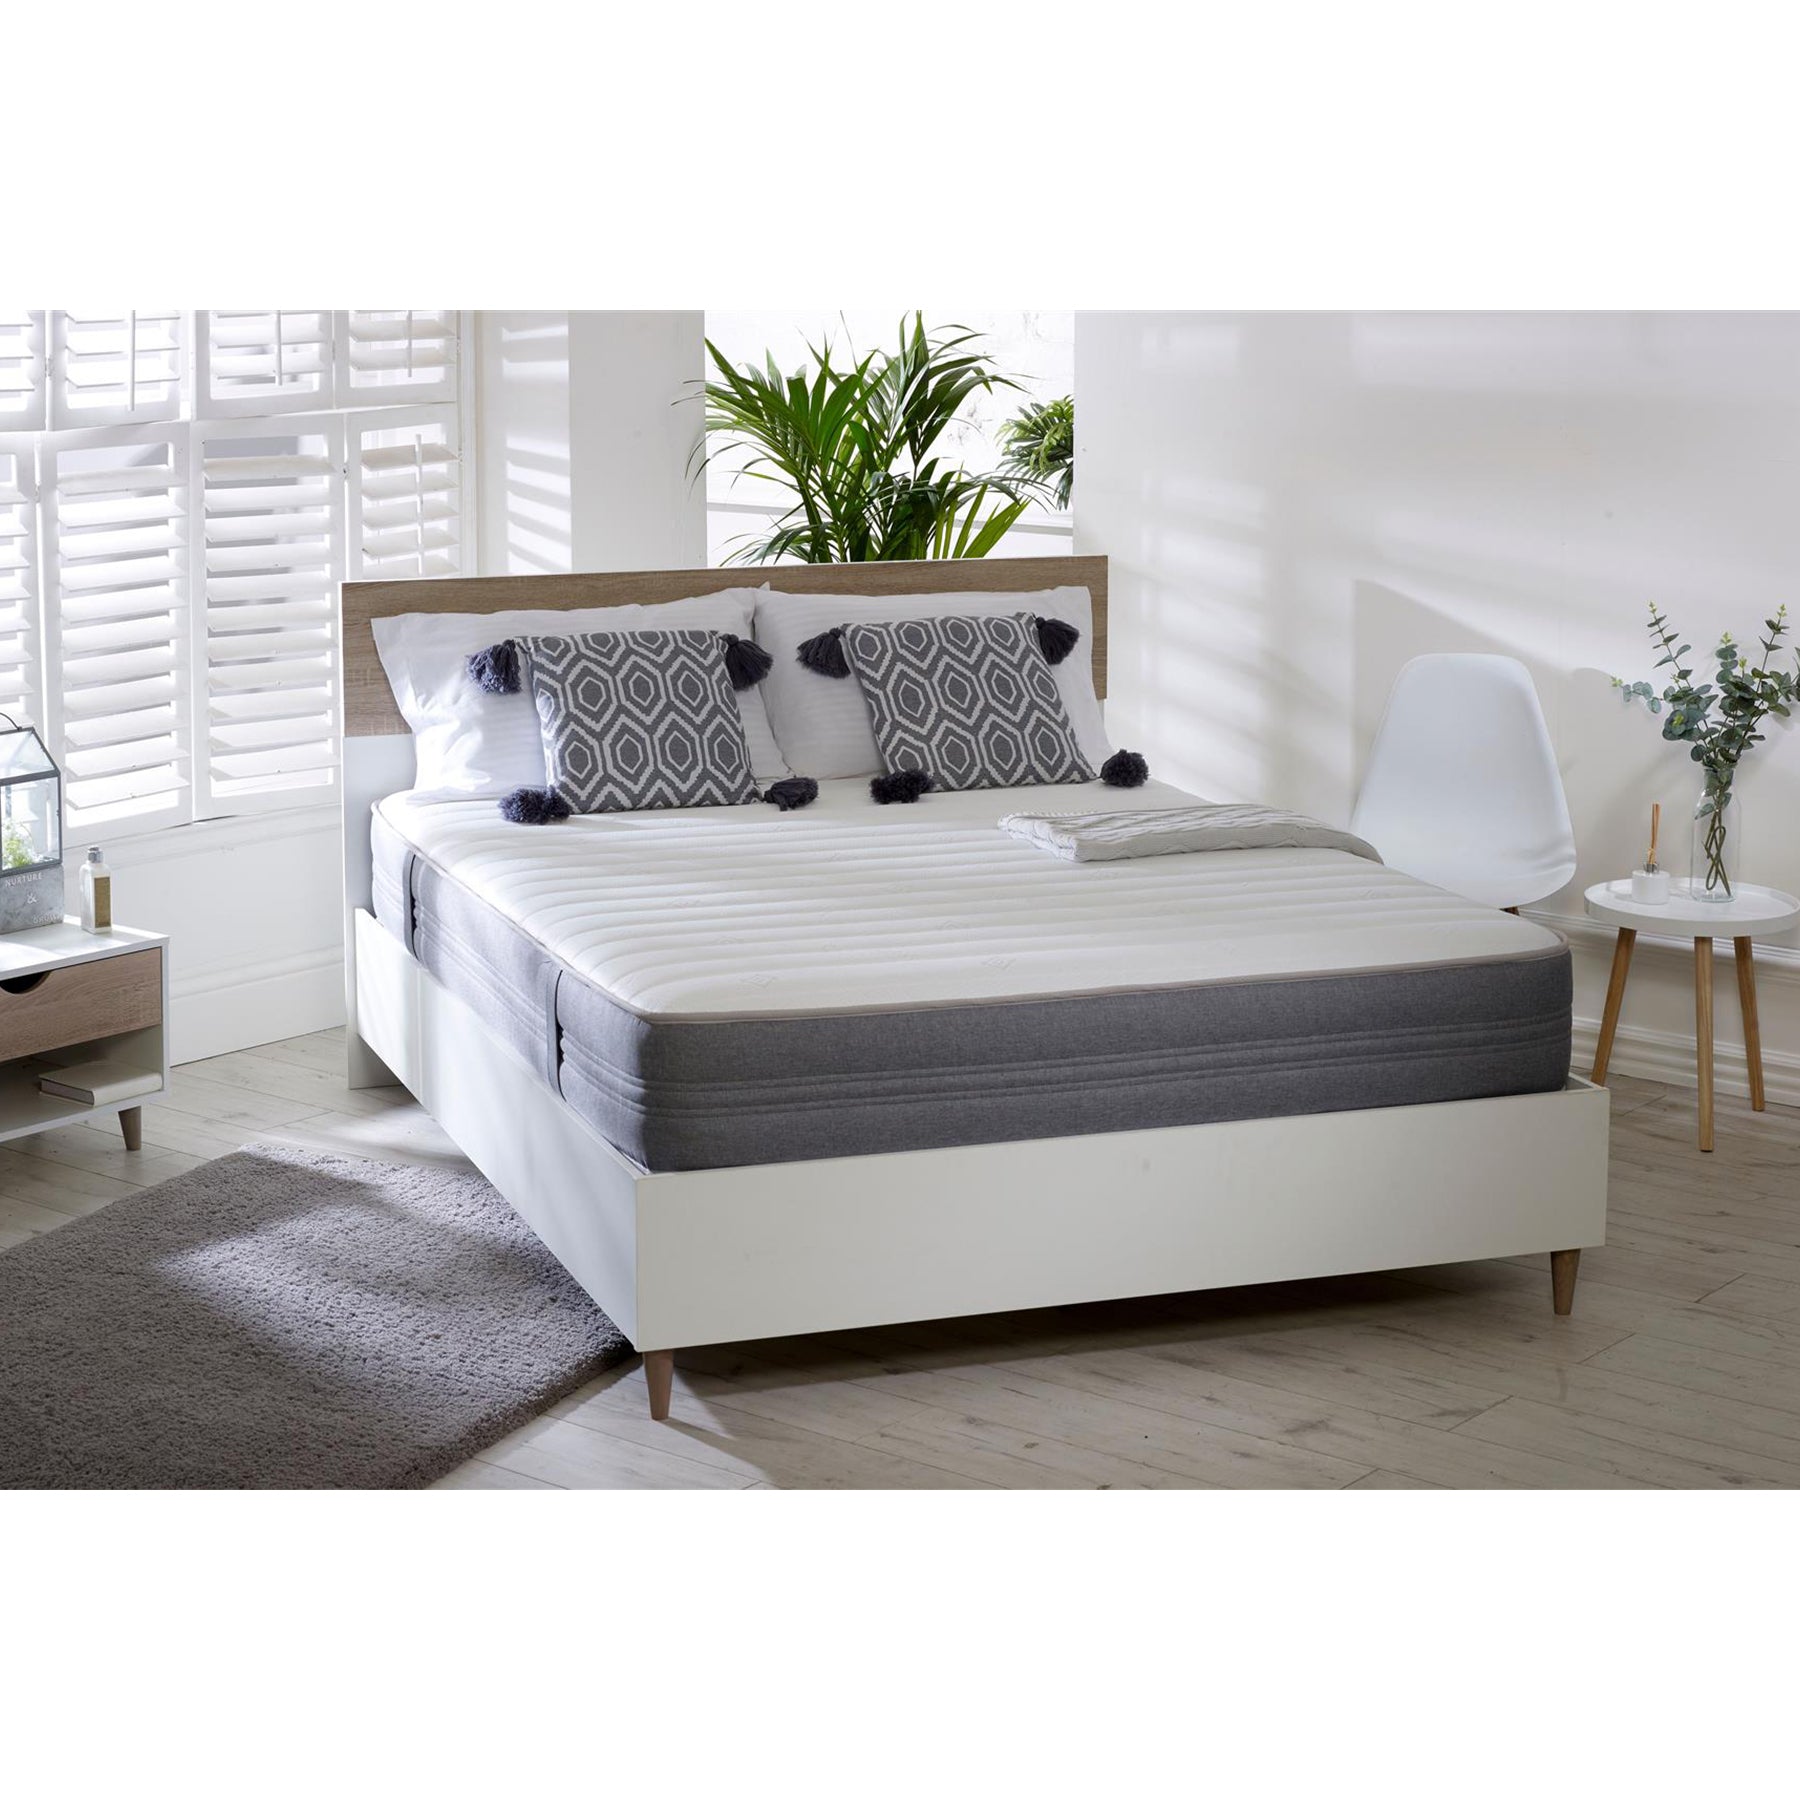 Starlight Beds Hybrid Straight line Memory foam with Handles Open Coil Spring Mattress